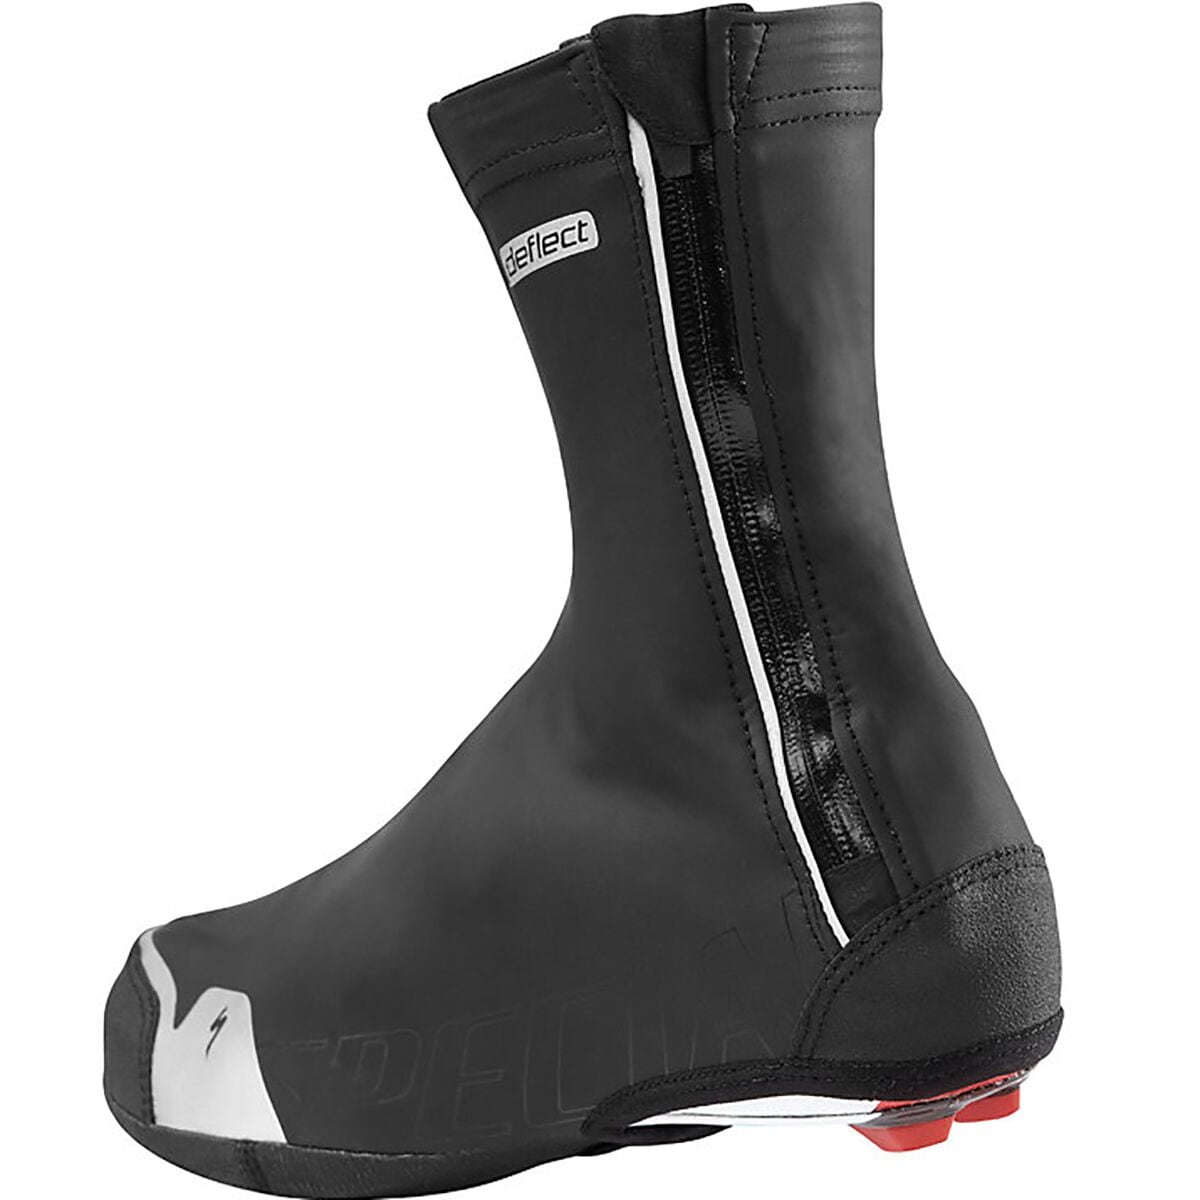 Specialized Deflect Comp Shoe...